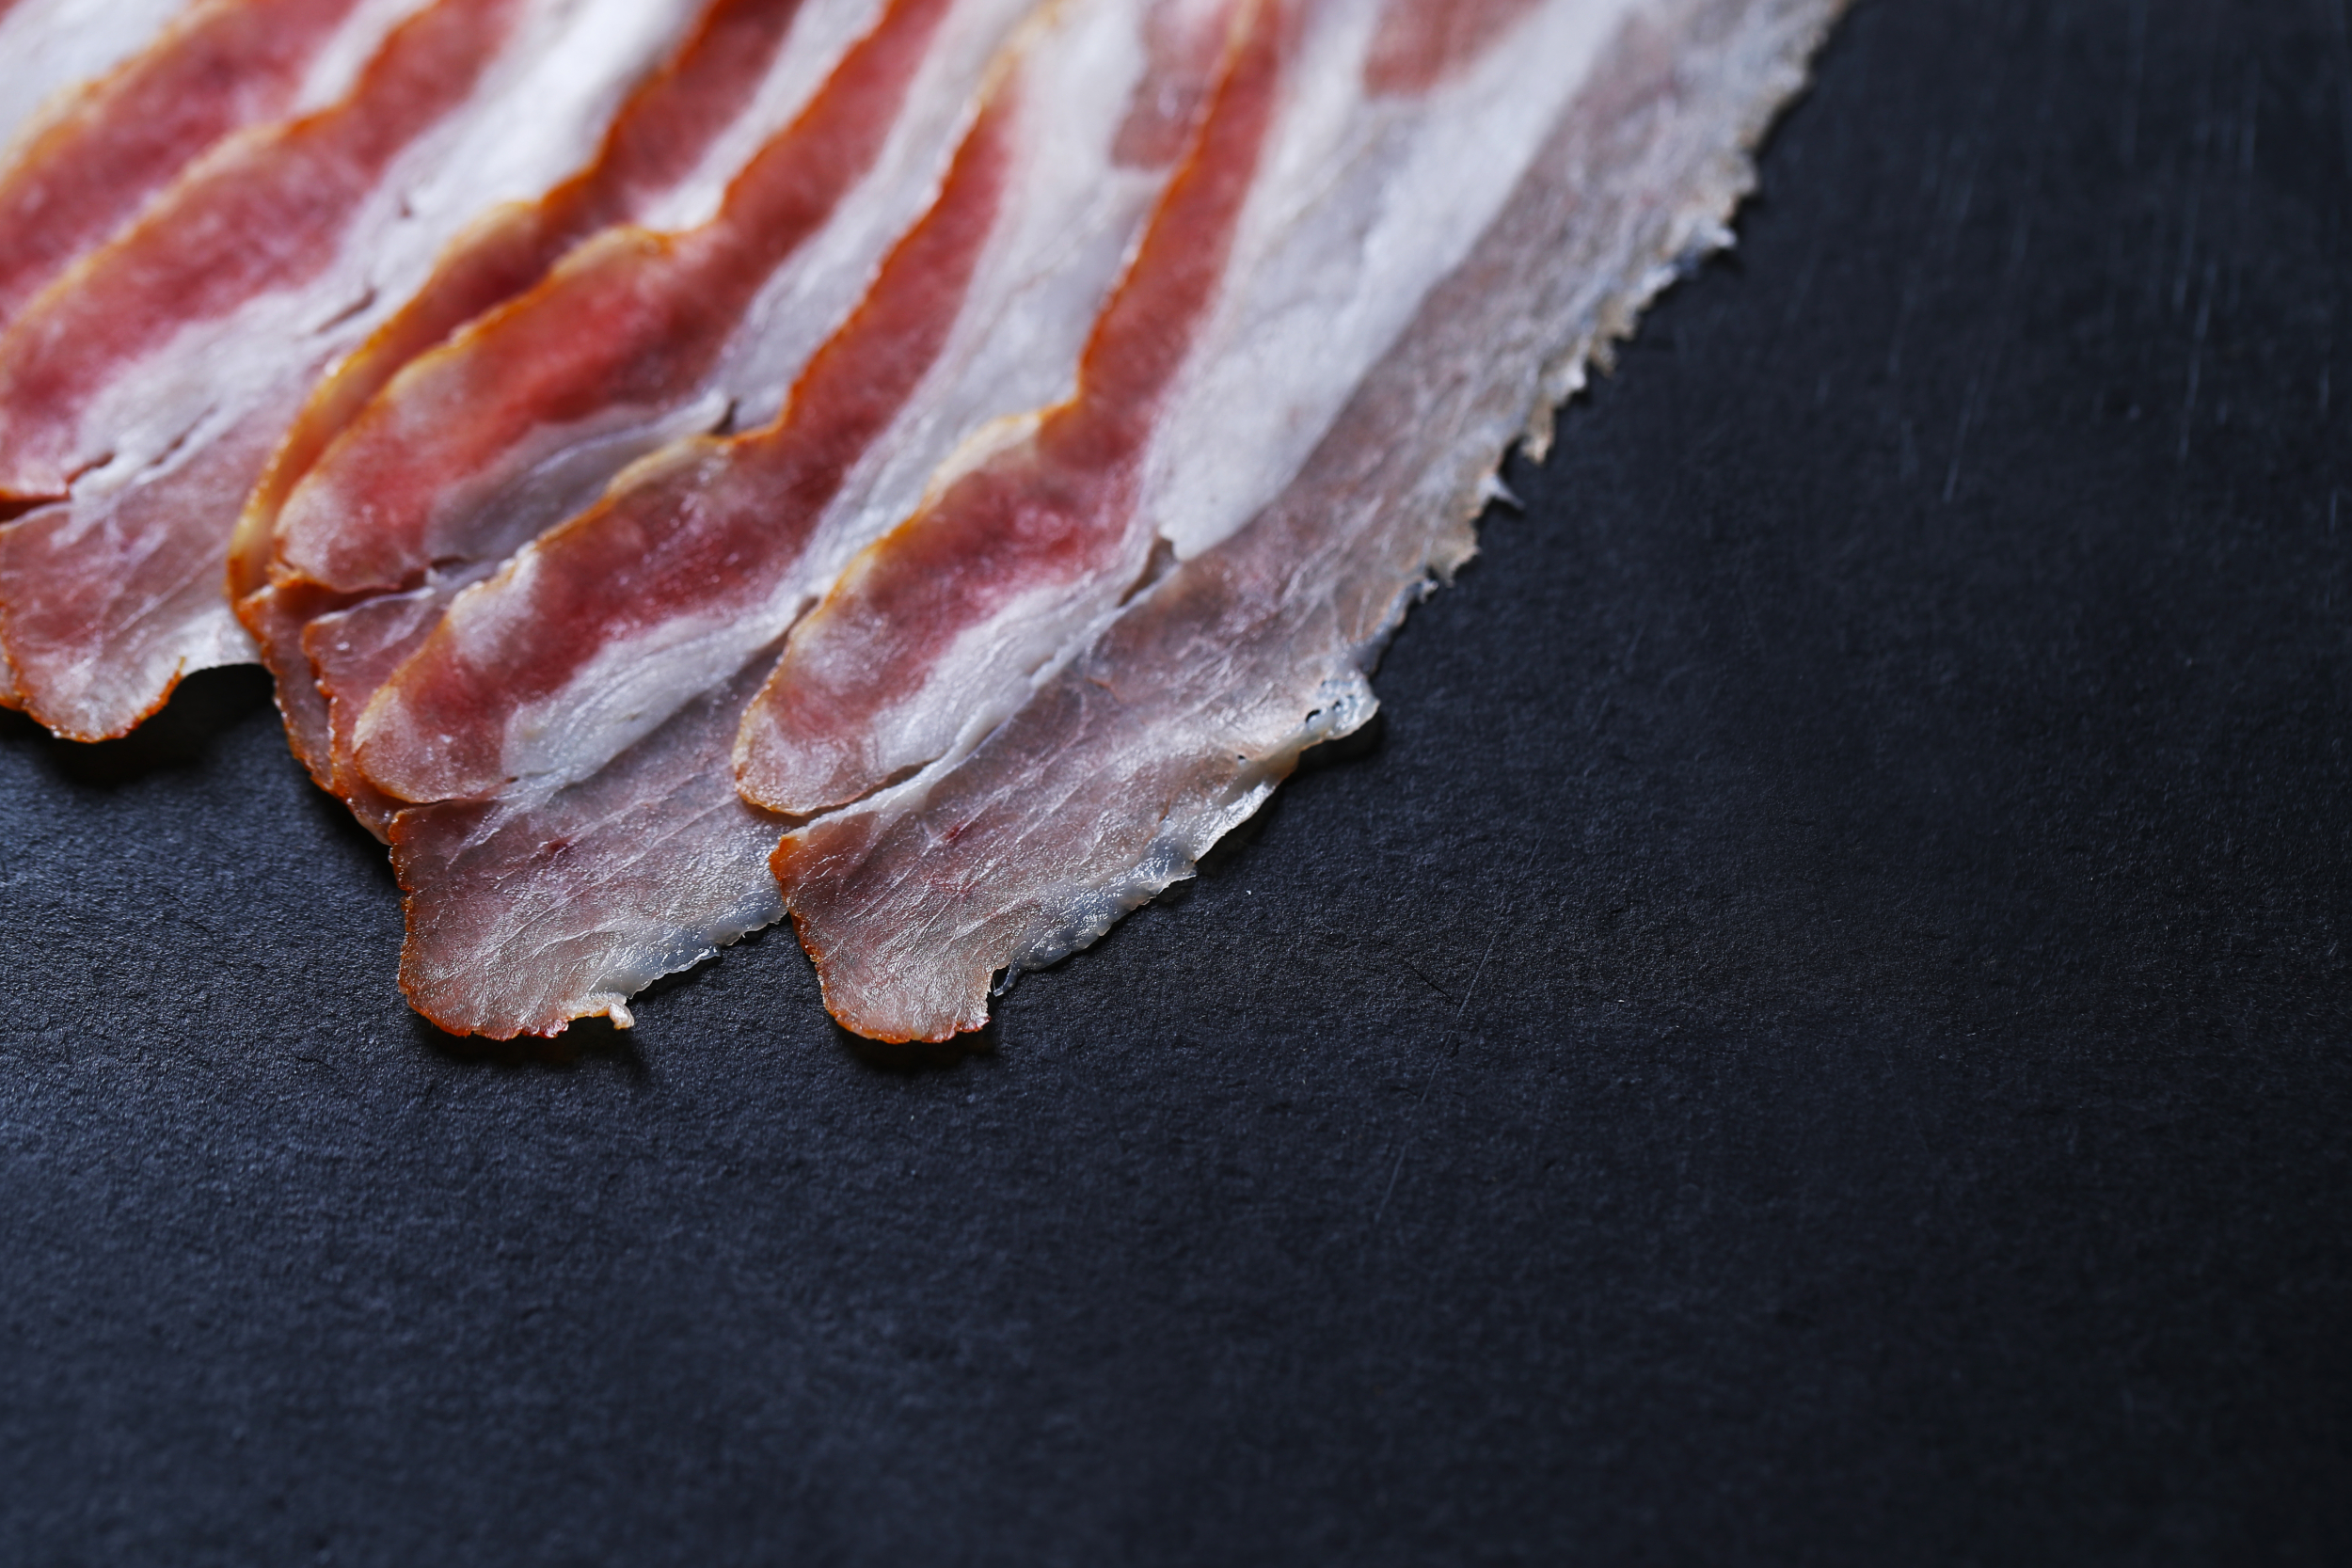 Tapeworm Discovered In Man’s Mind From Consuming Undercooked Bacon: Know Dangers Of Neurocysticercosis